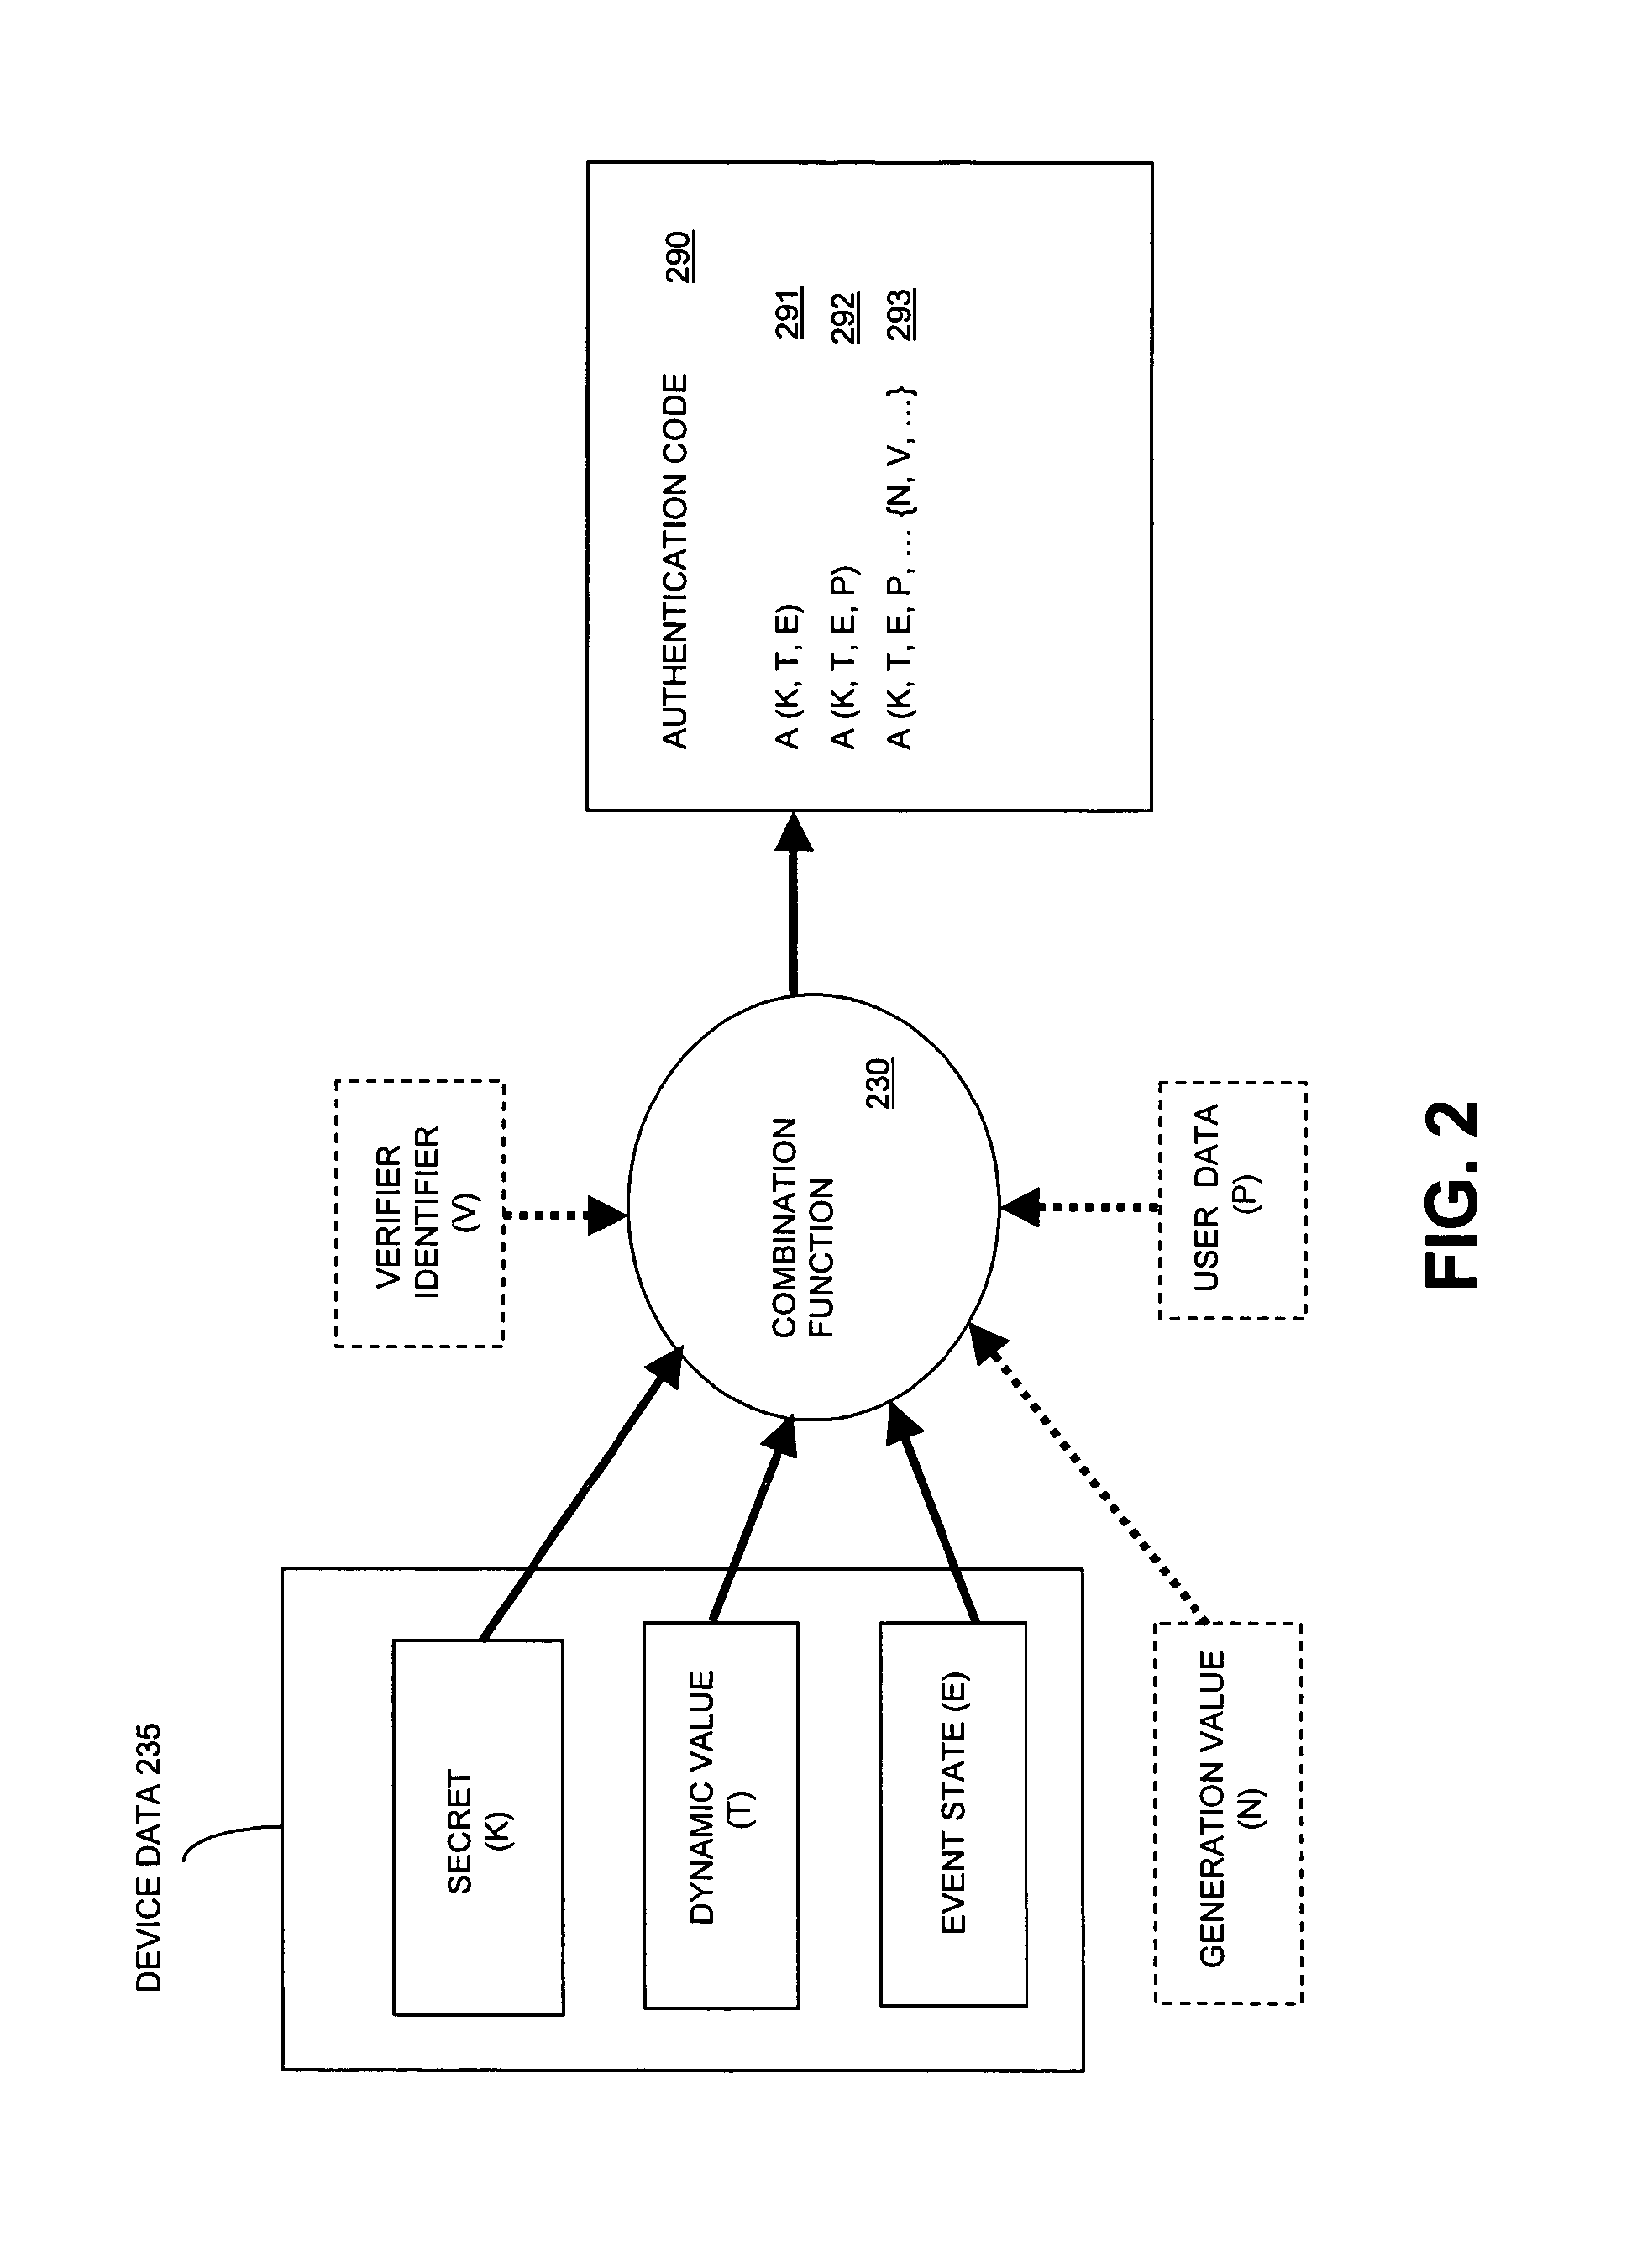 Identity authentication system and method